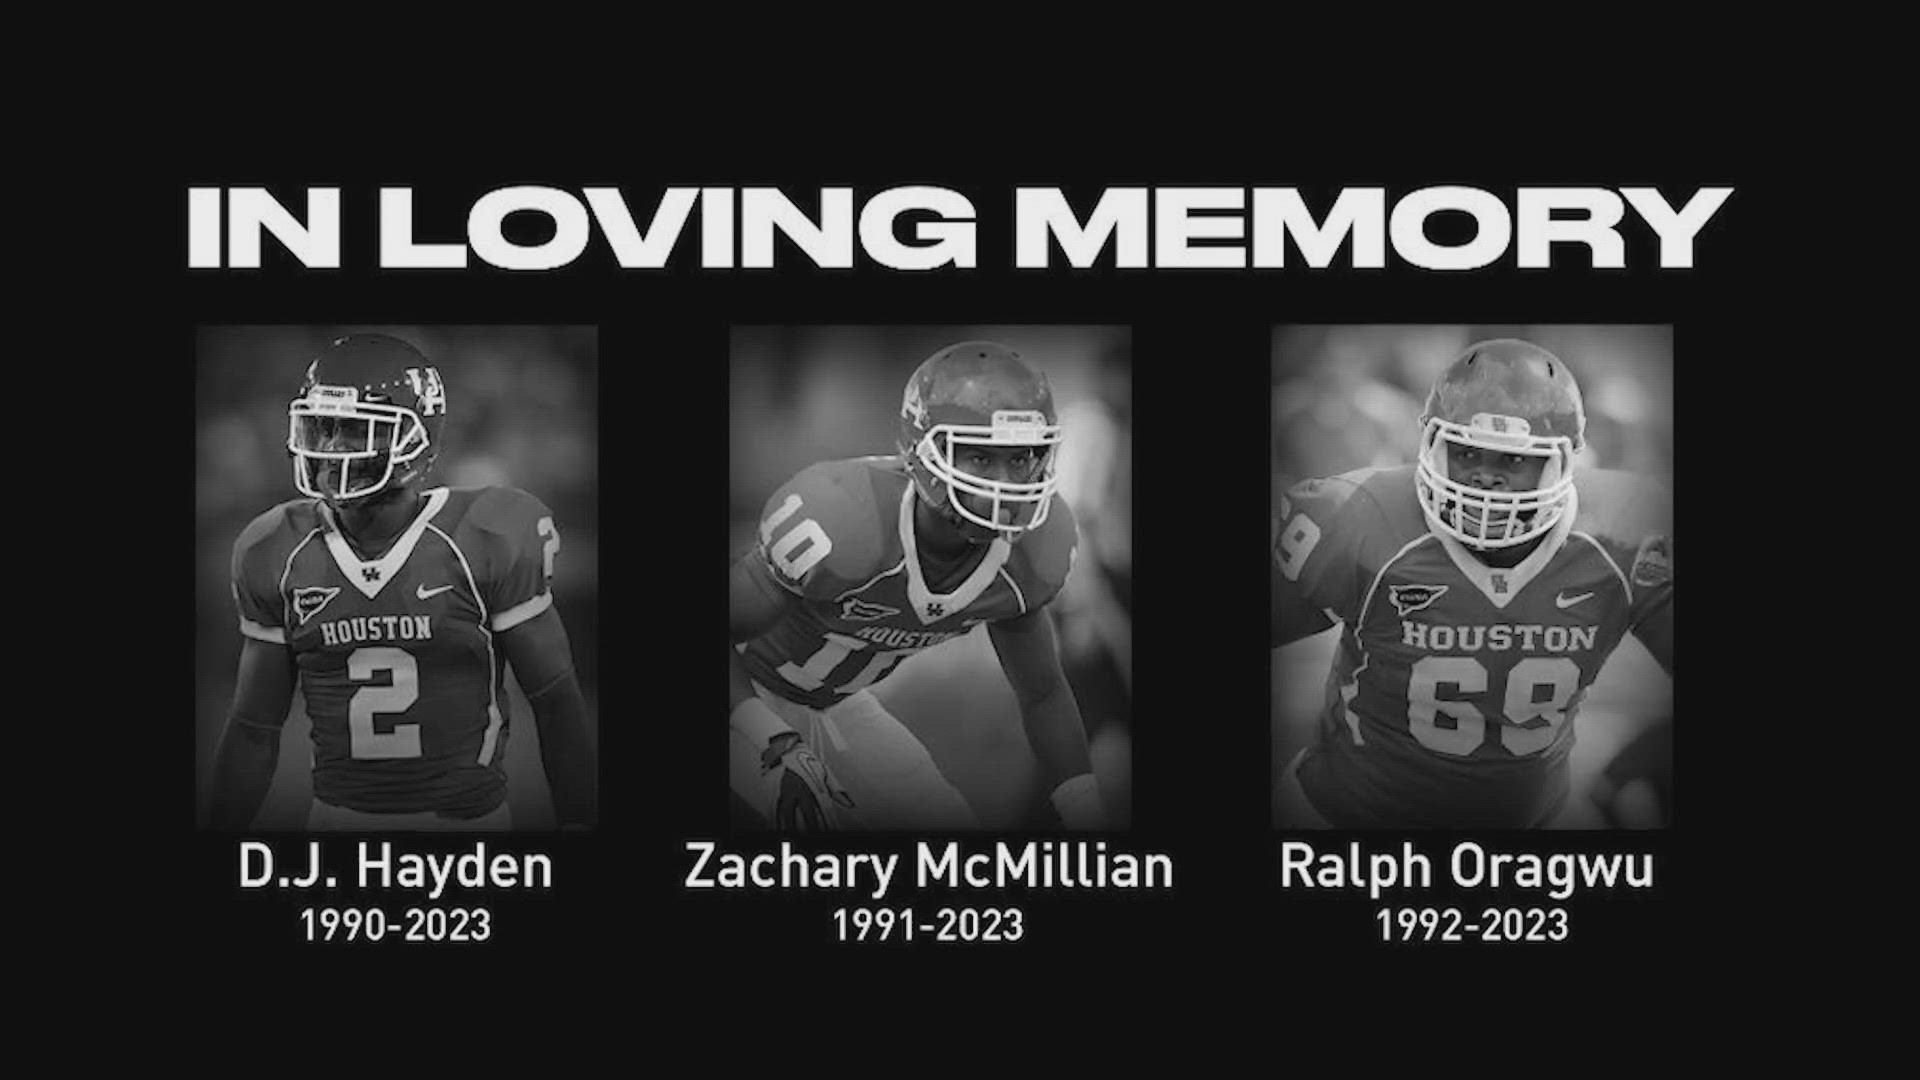 The victims include three former University of Houston football players as well as a Missouri City woman who was described as a beautiful, giving person.